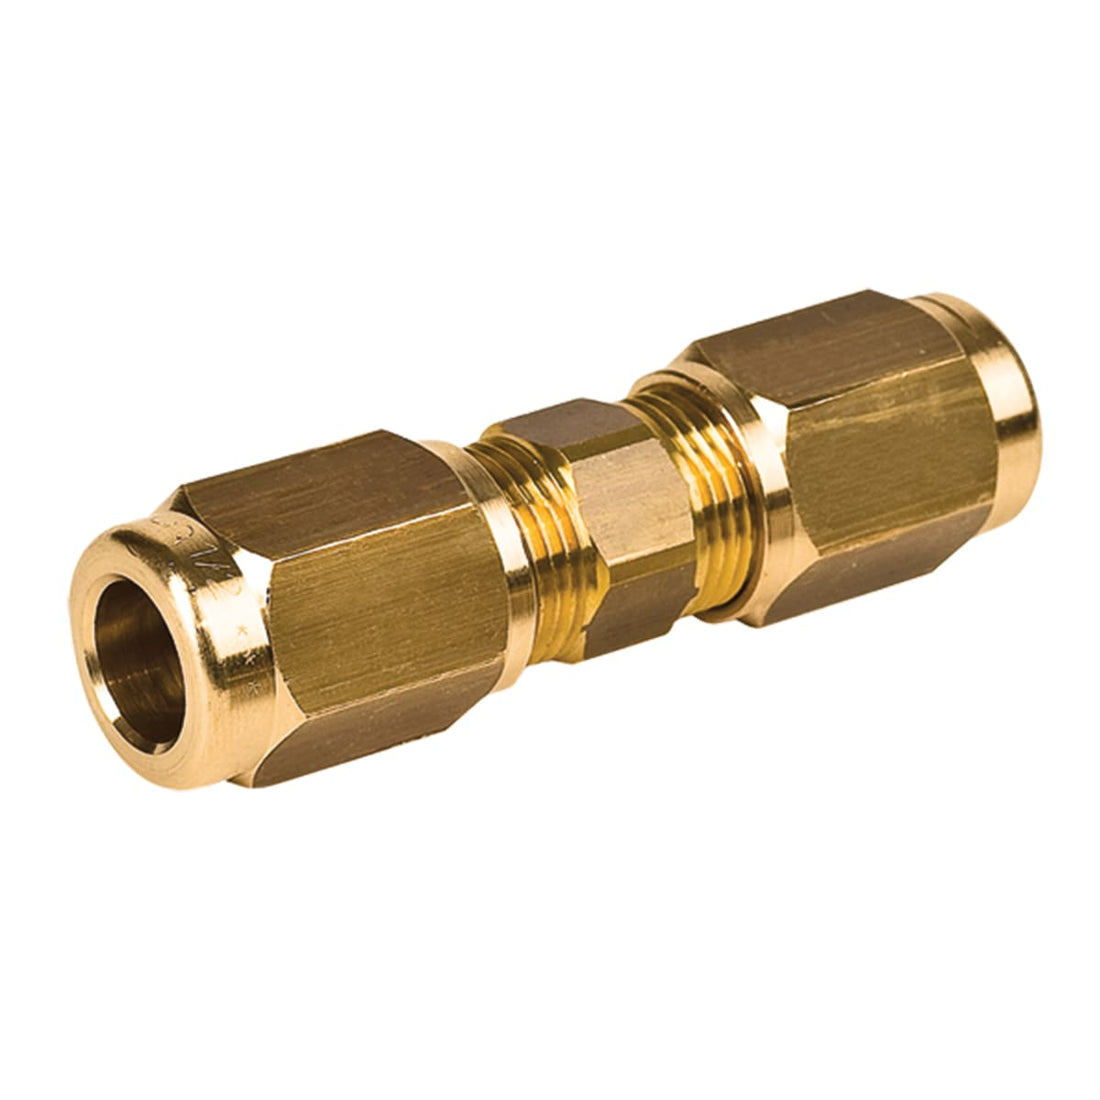 SELF-CLAMPING LINEAR FITTING DIA 1/2 INCH FOR AIR CONDITIONING COPPER PIPE